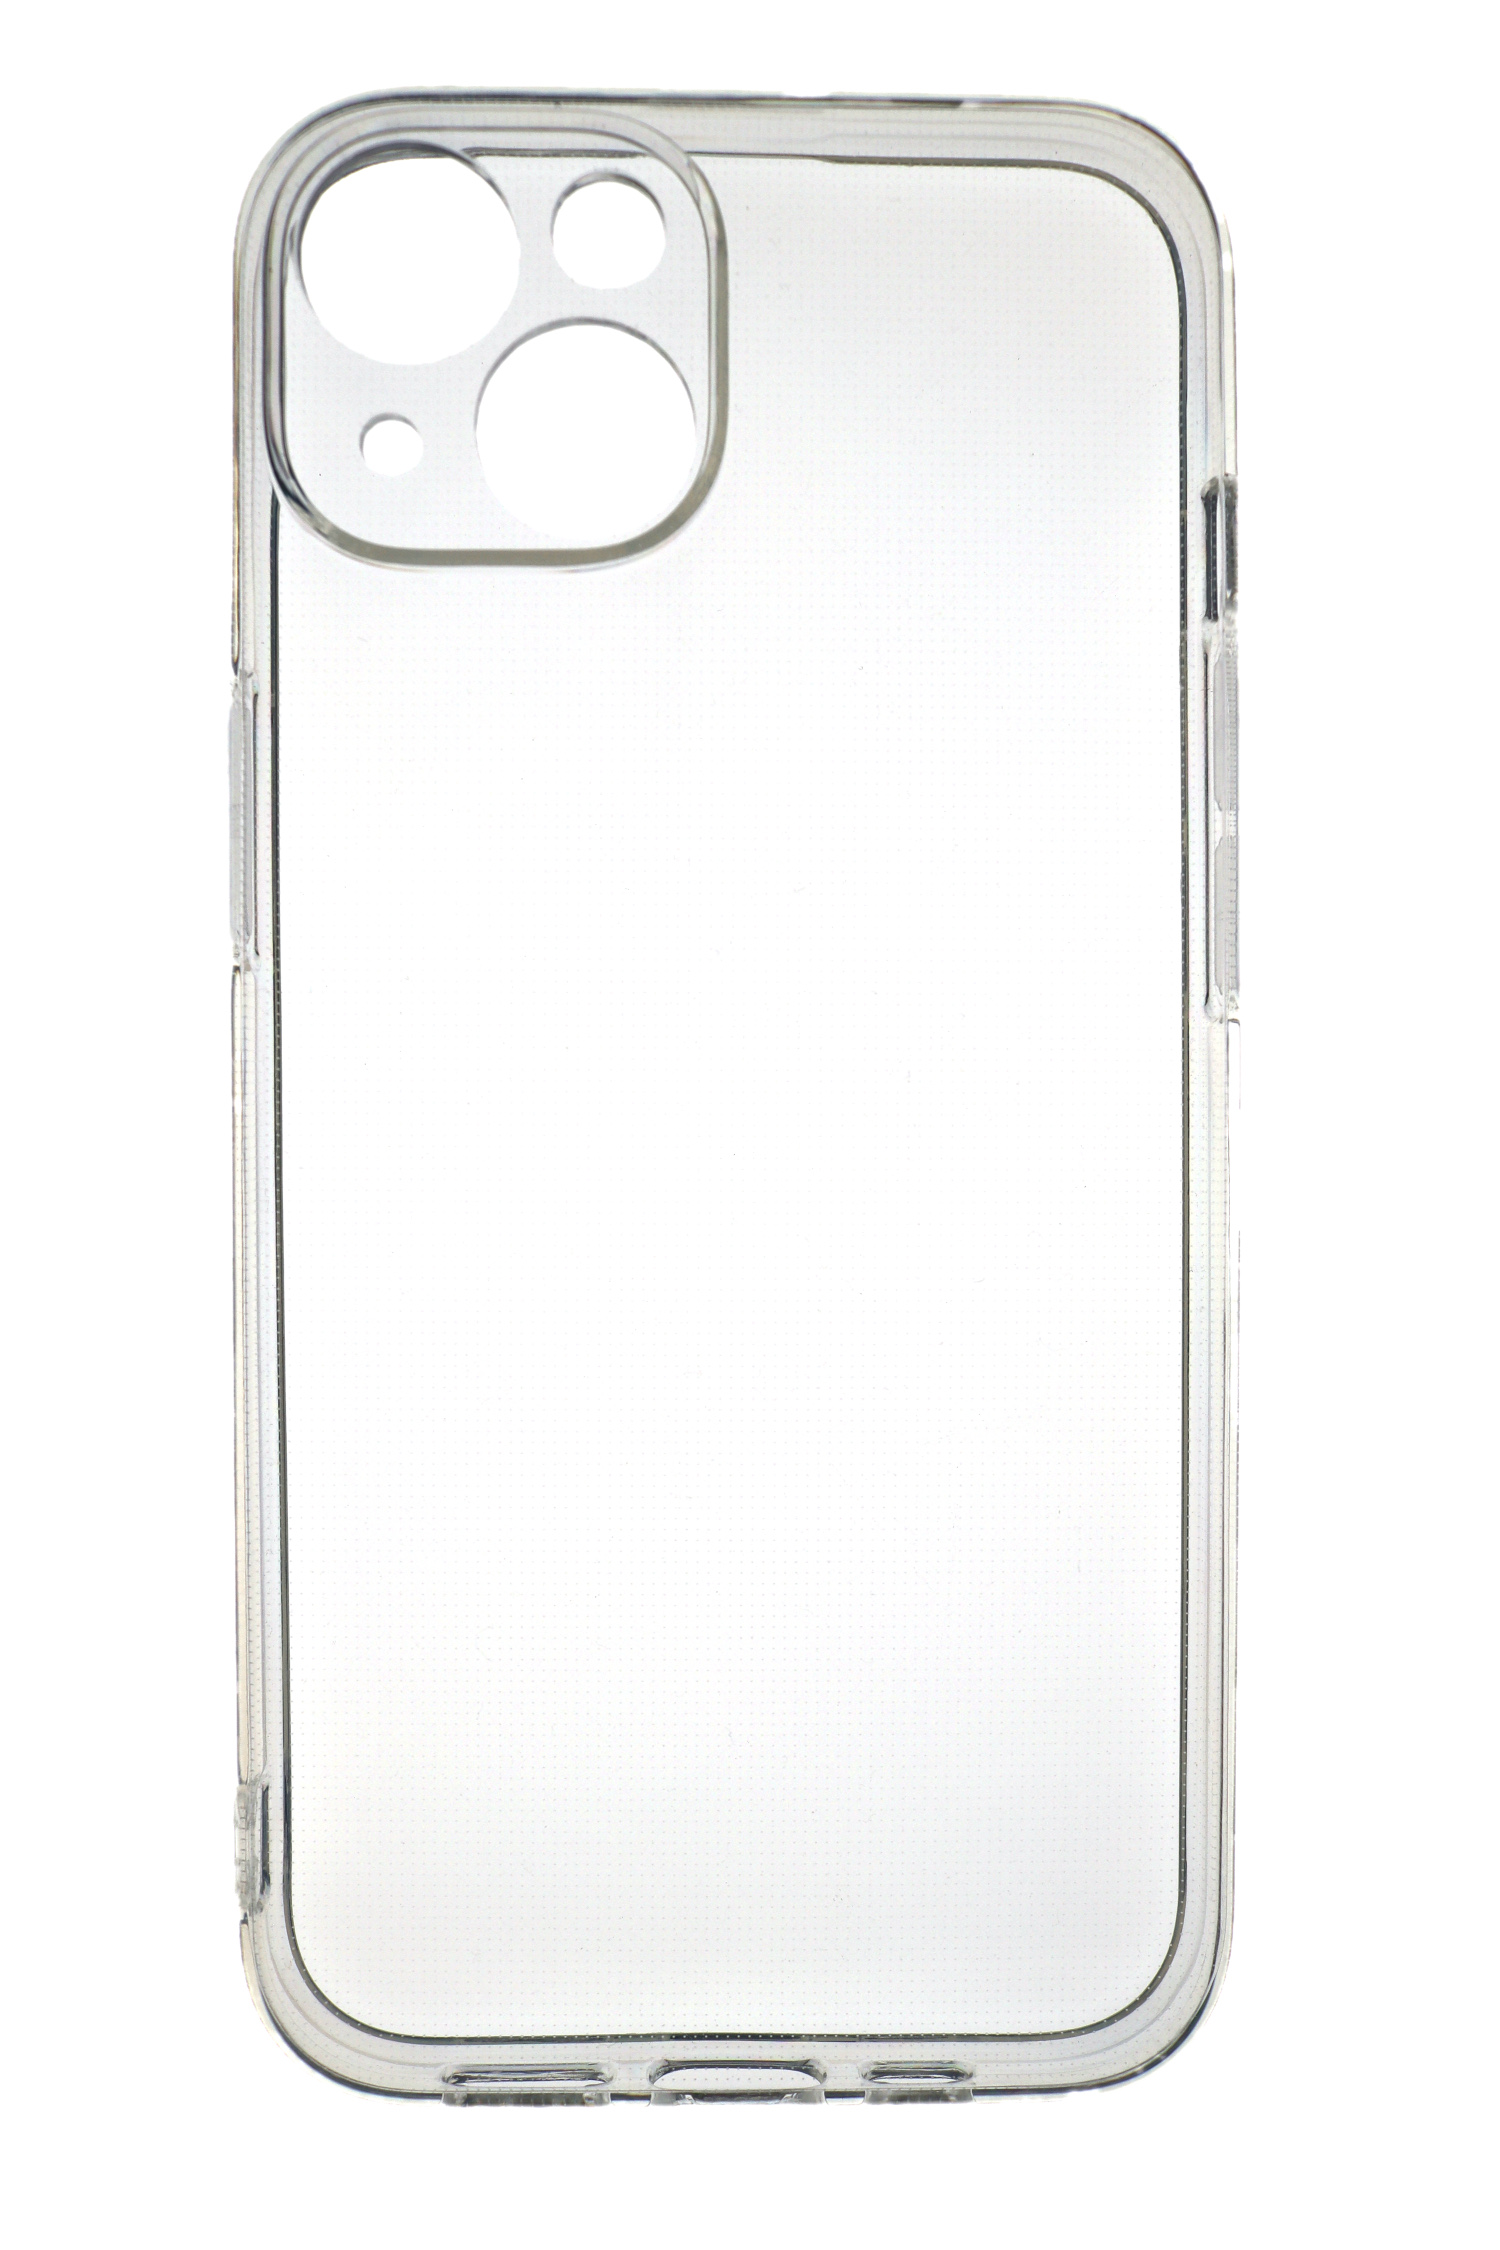 mm Strong, JAMCOVER 2.0 Apple, Transparent TPU iPhone Backcover, 15 Plus, Case